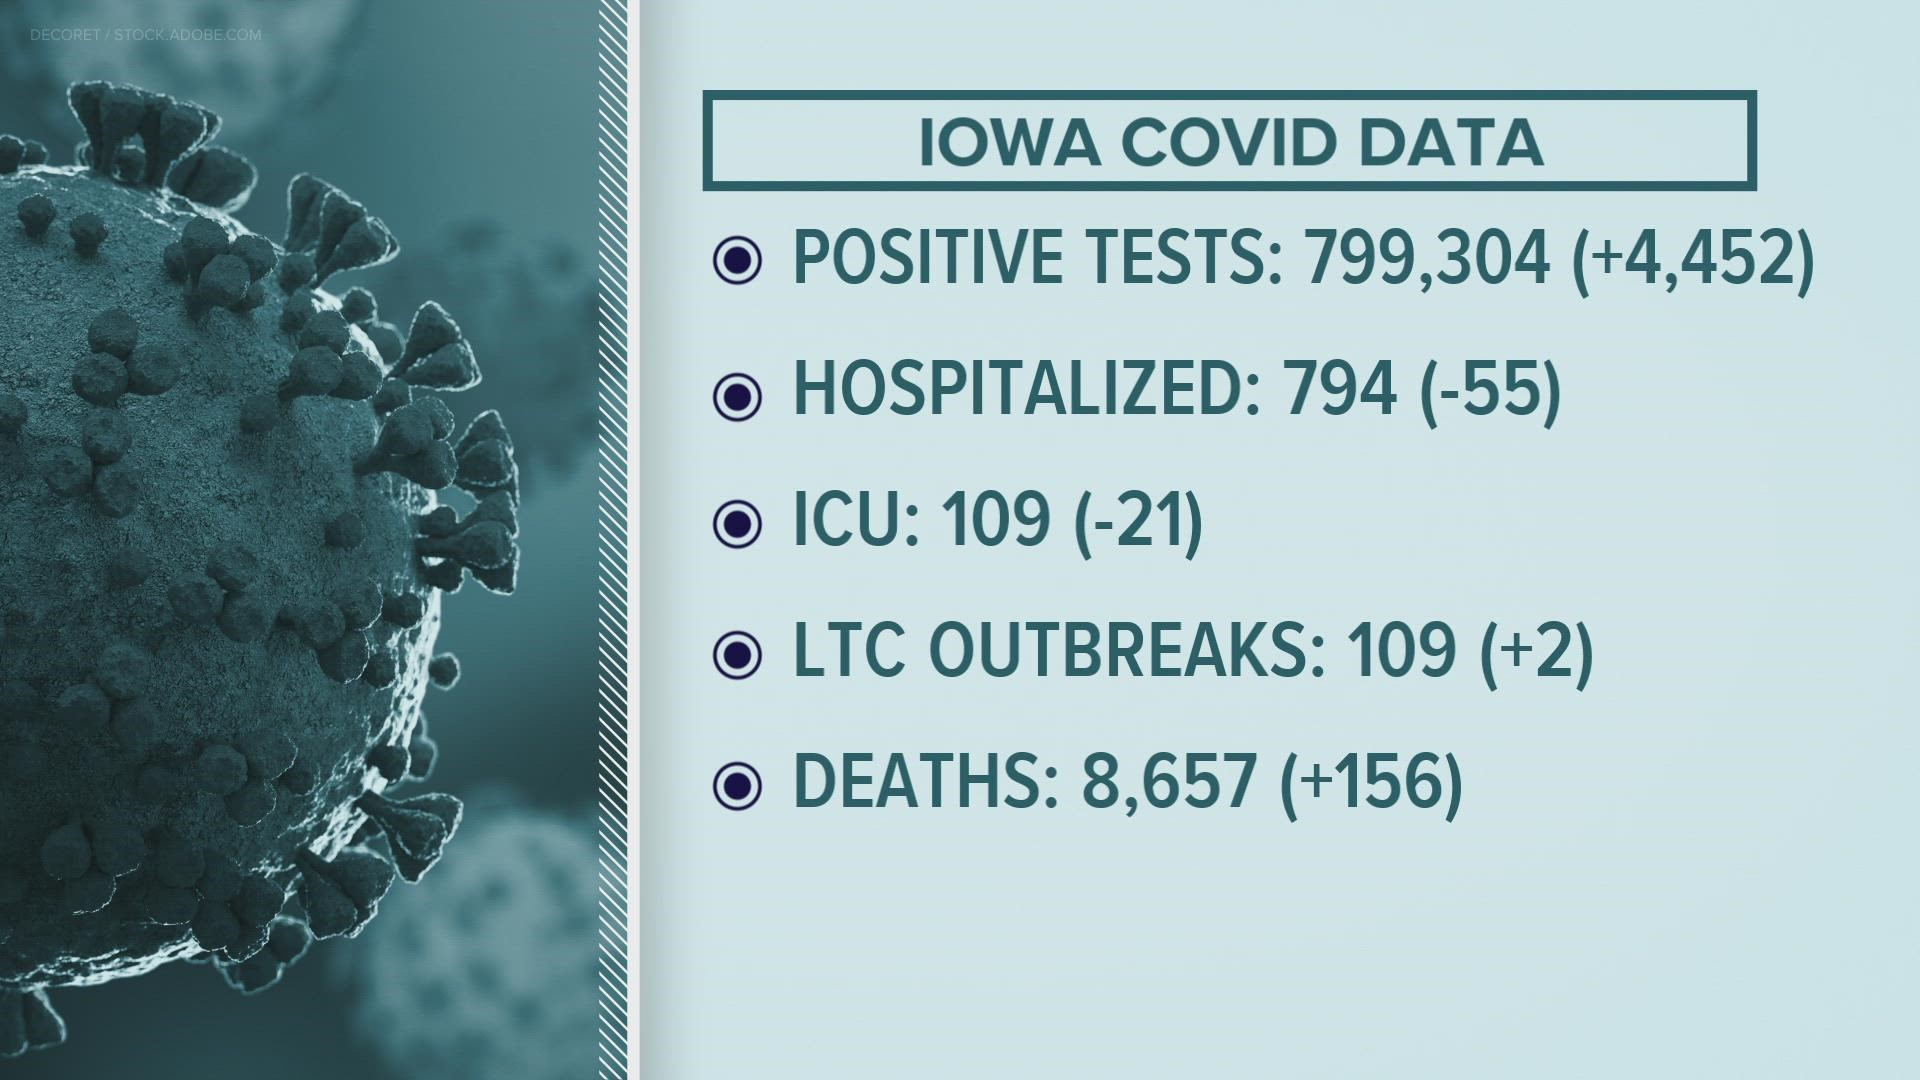 The Iowa Department of Public Health also reported 109 long-term care facility outbreaks, an increase of two from Monday.